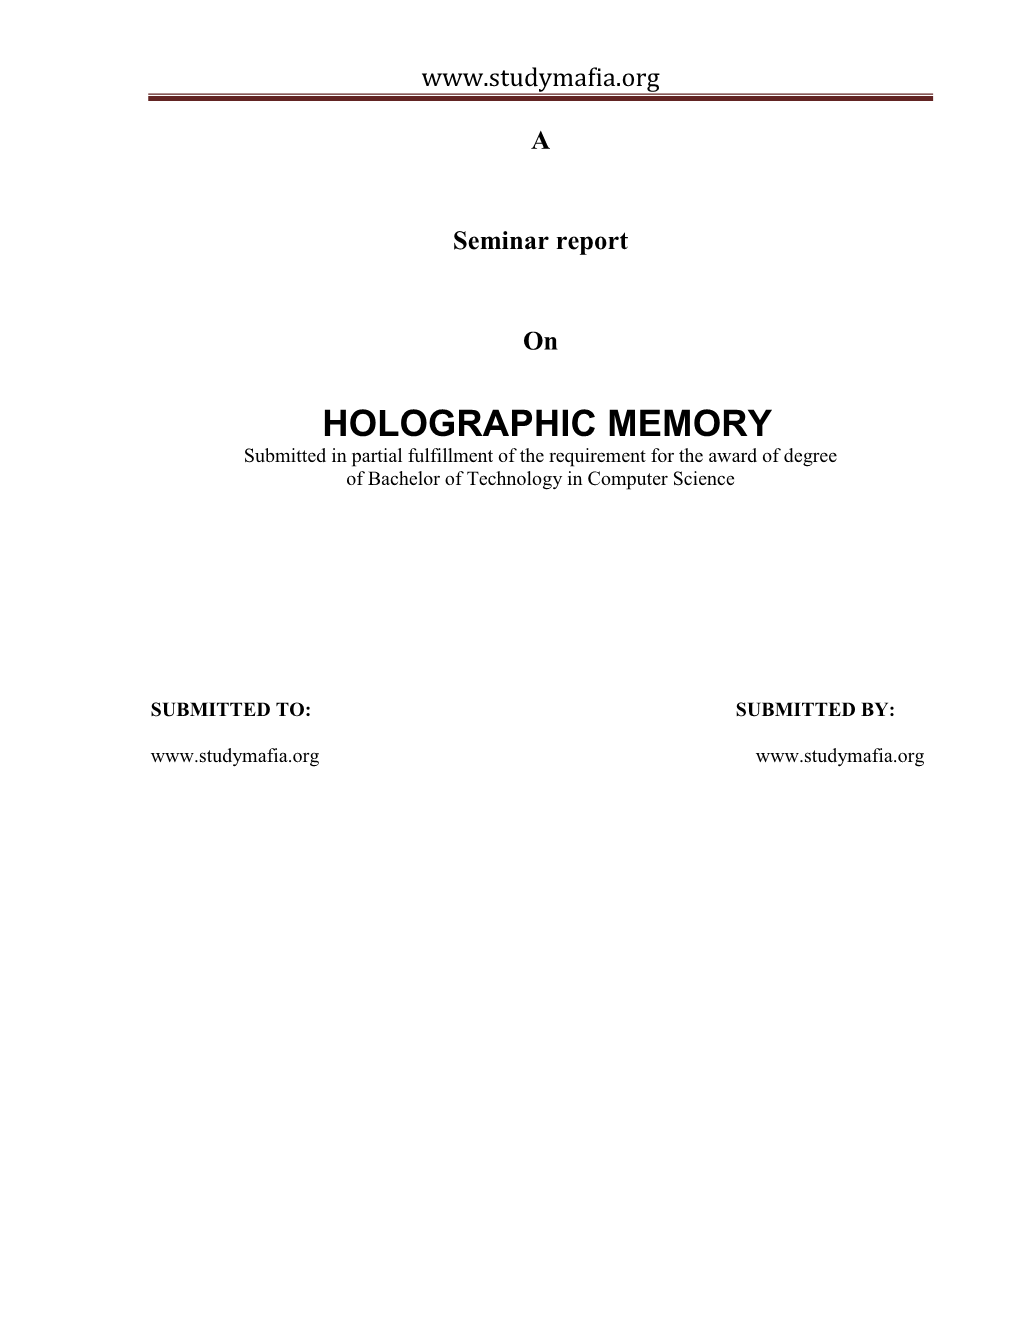 HOLOGRAPHIC MEMORY Submitted in Partial Fulfillment of the Requirement for the Award of Degree of Bachelor of Technology in Computer Science